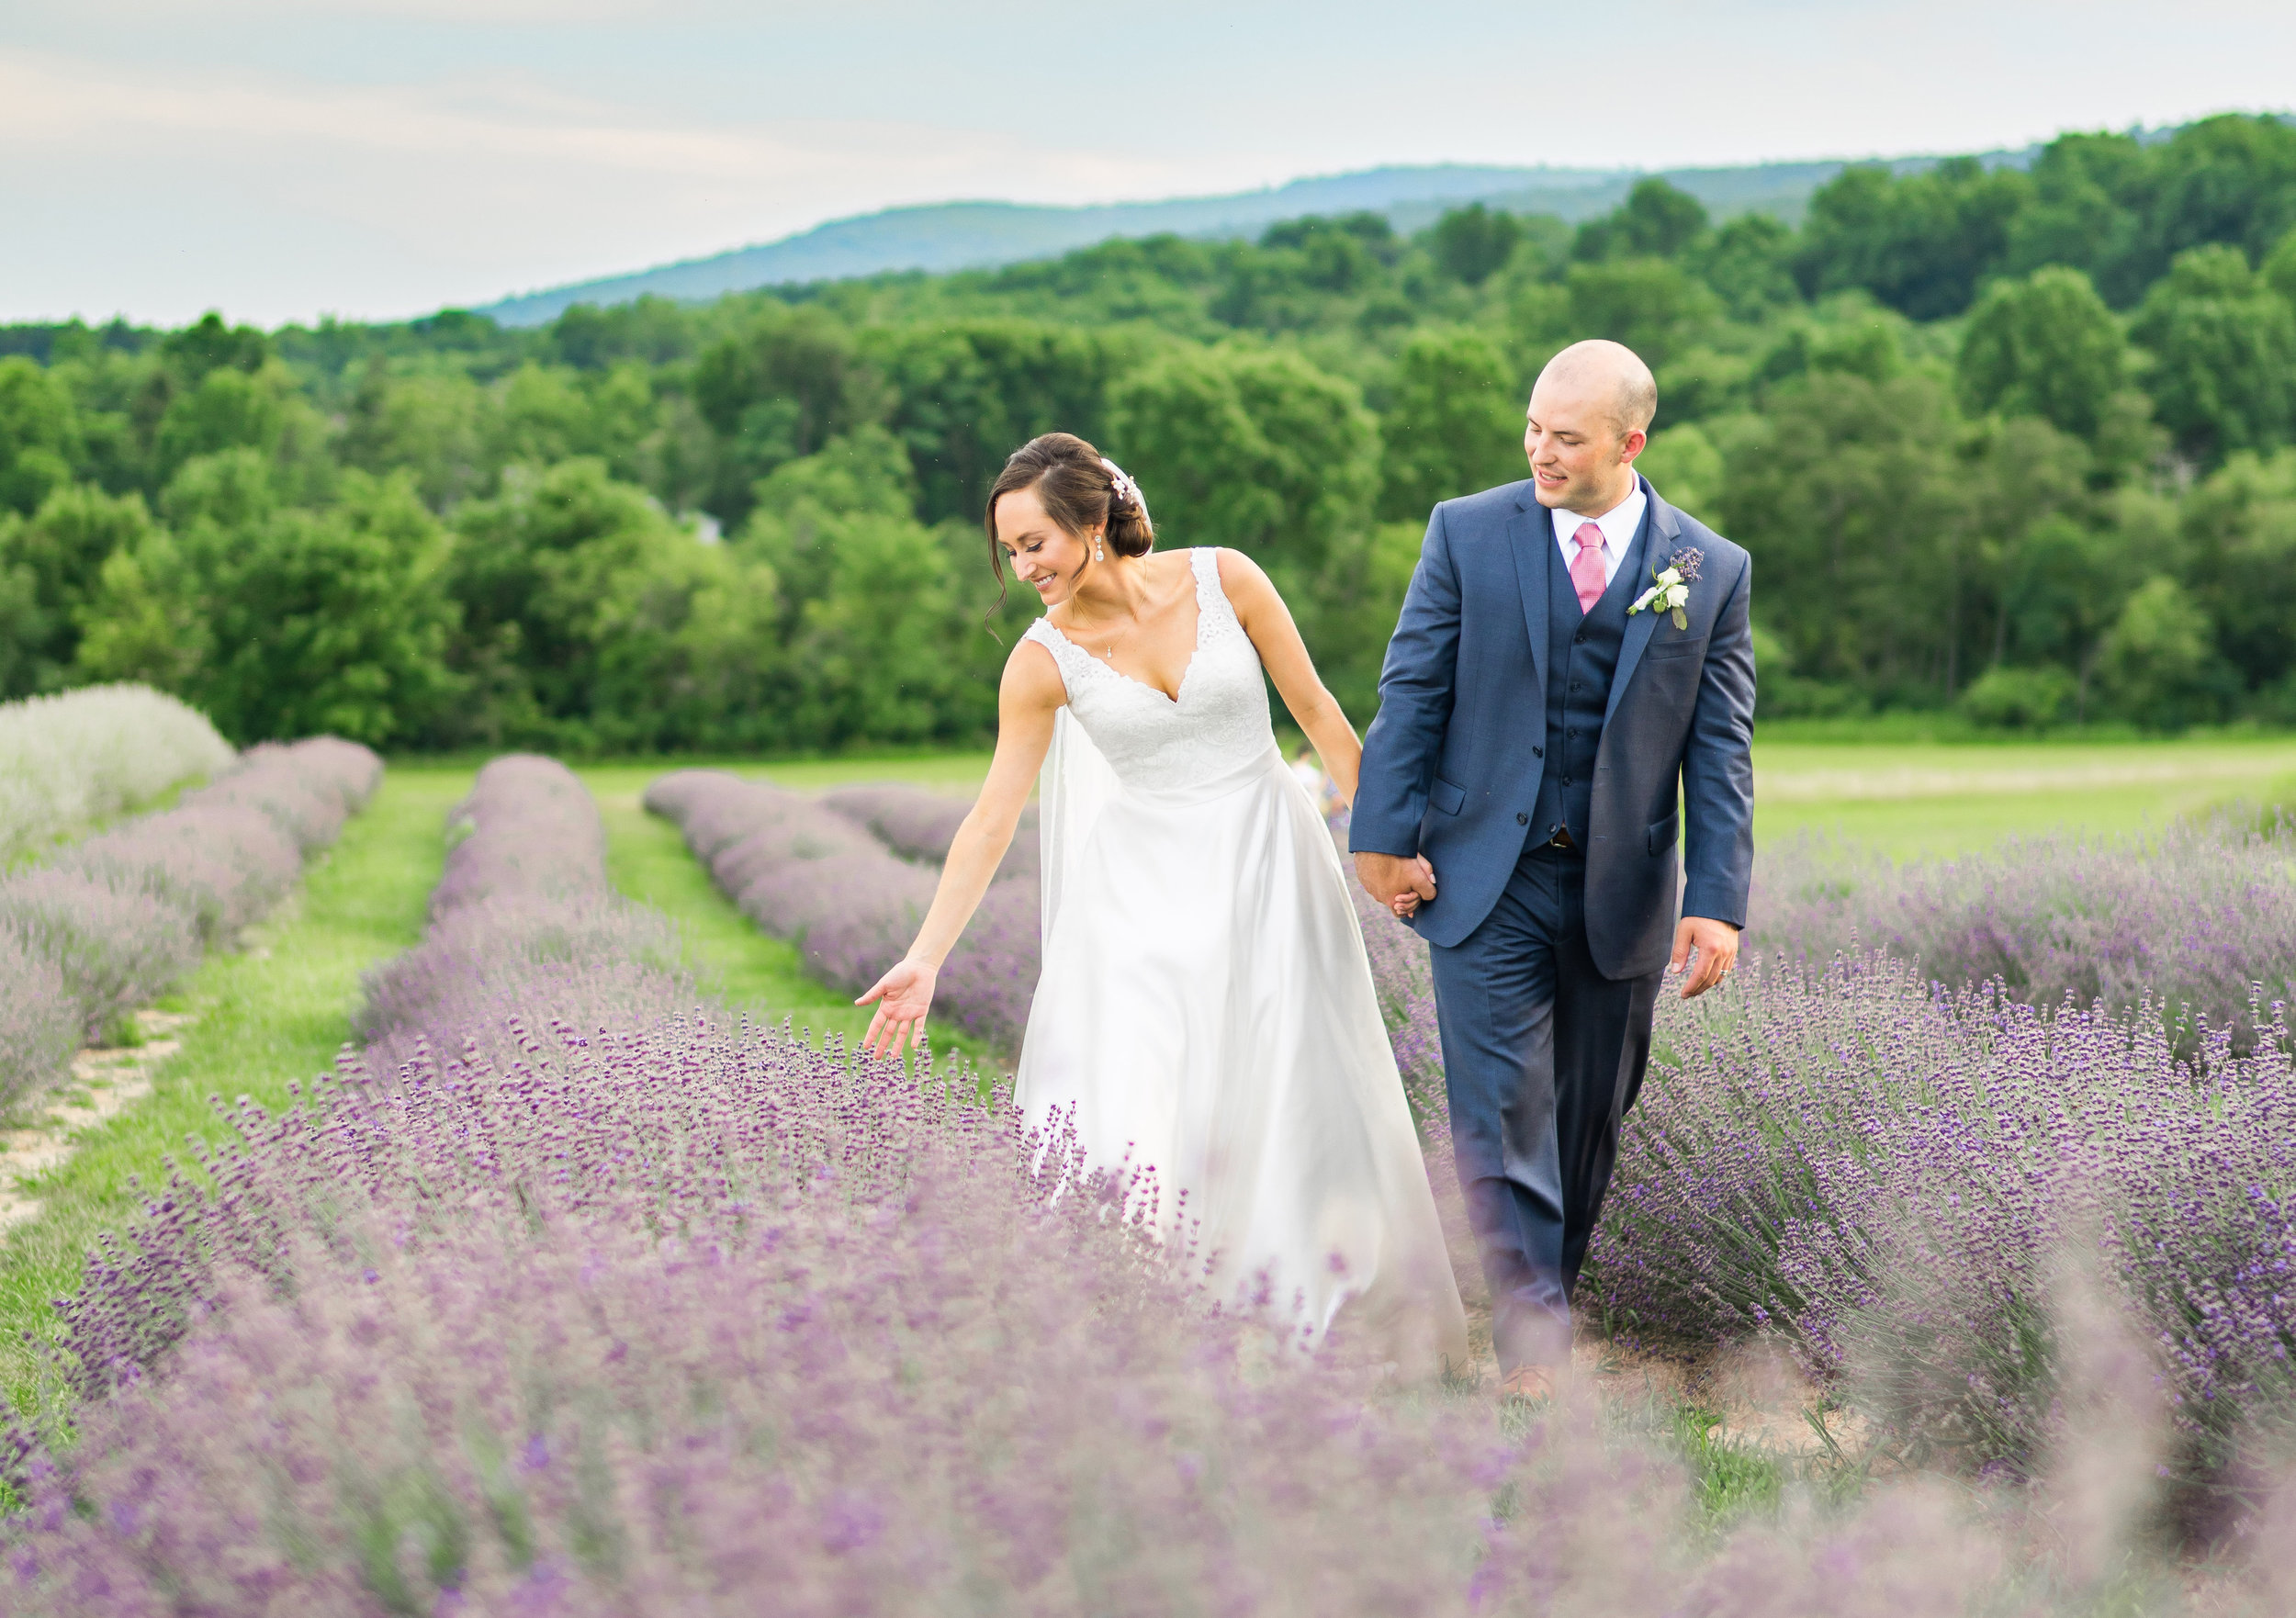 Amazing lavender field wedding photo with bride and groom